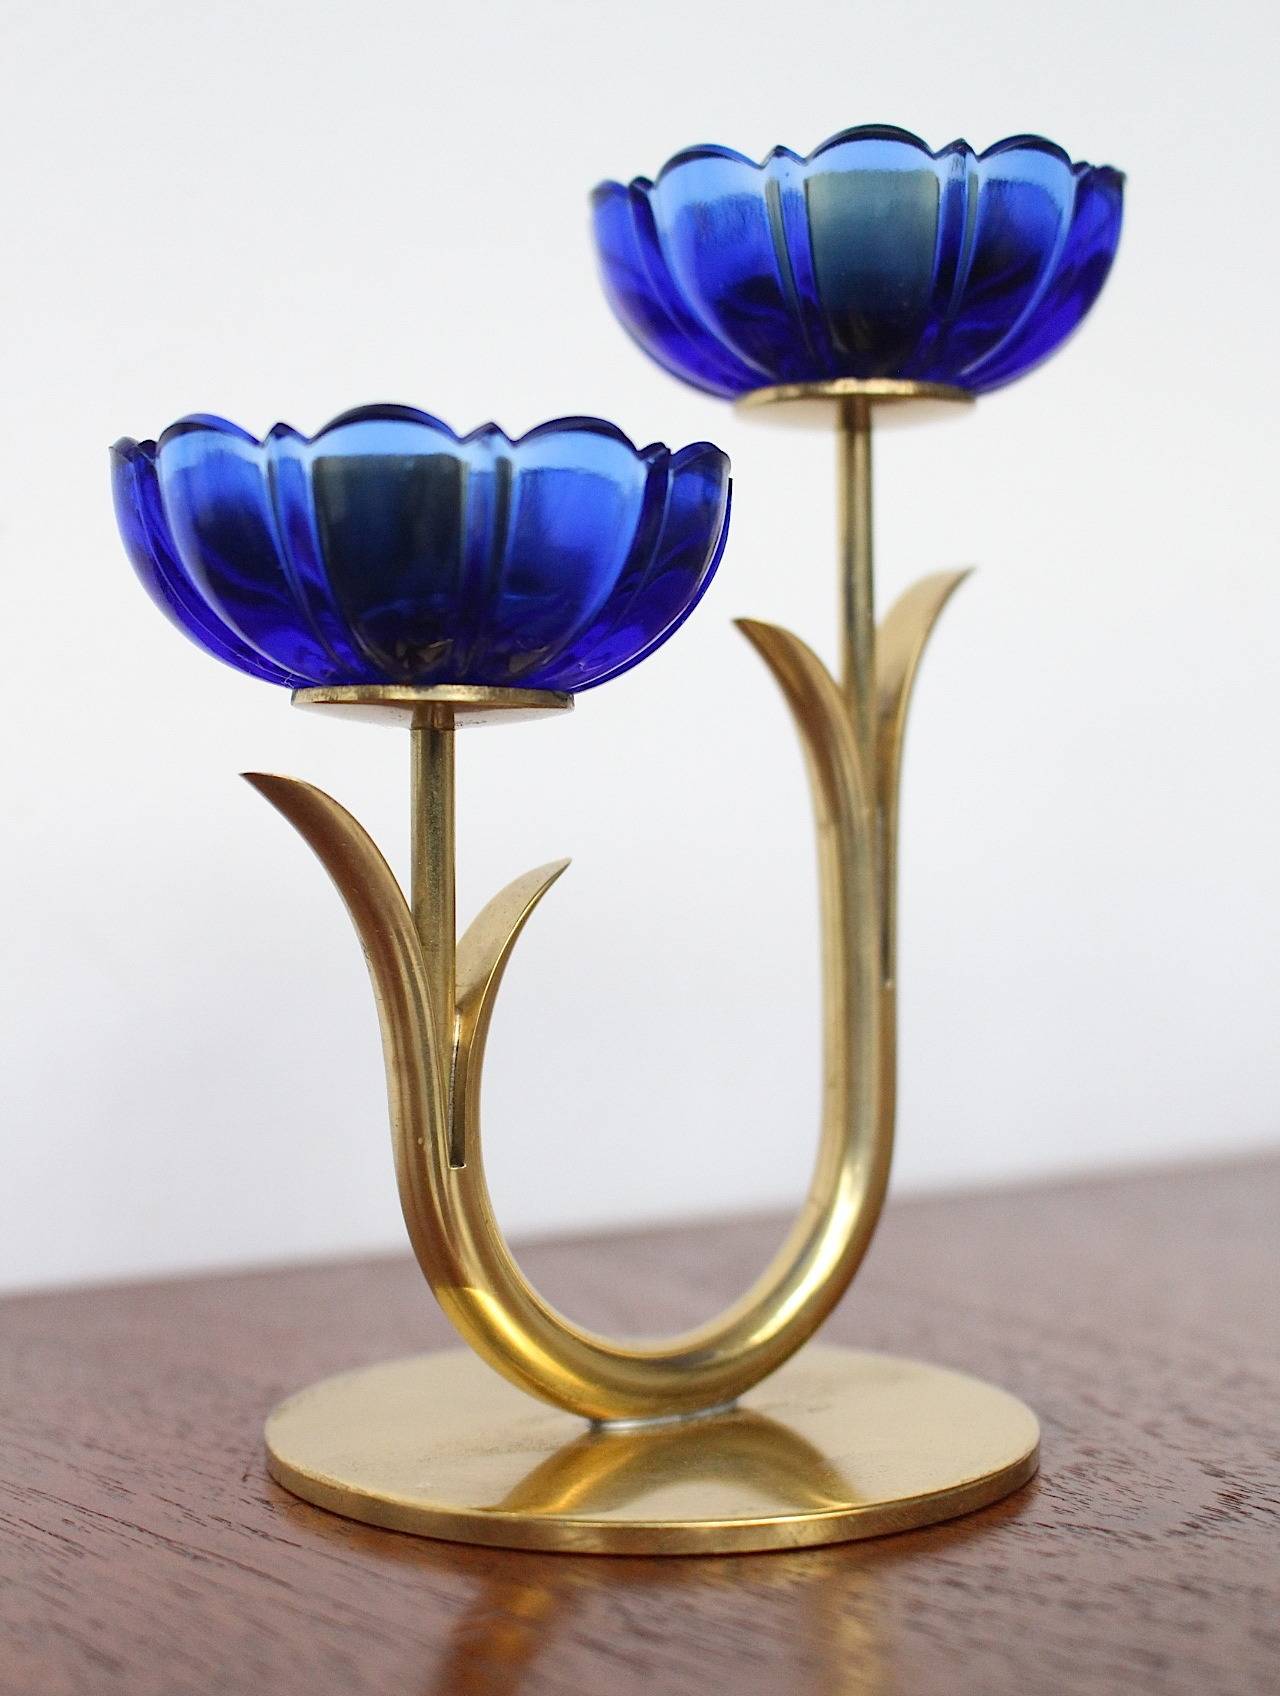 Beautiful ensemble of three candleholders designed by Gunnar Ander.
Manufactured by Ystad Metal, Sweden.

Executed in transparent blue glass and brass in a flower motif.

Measure: The large candlestick measures 21 cm width, 13 cm high and 6.5